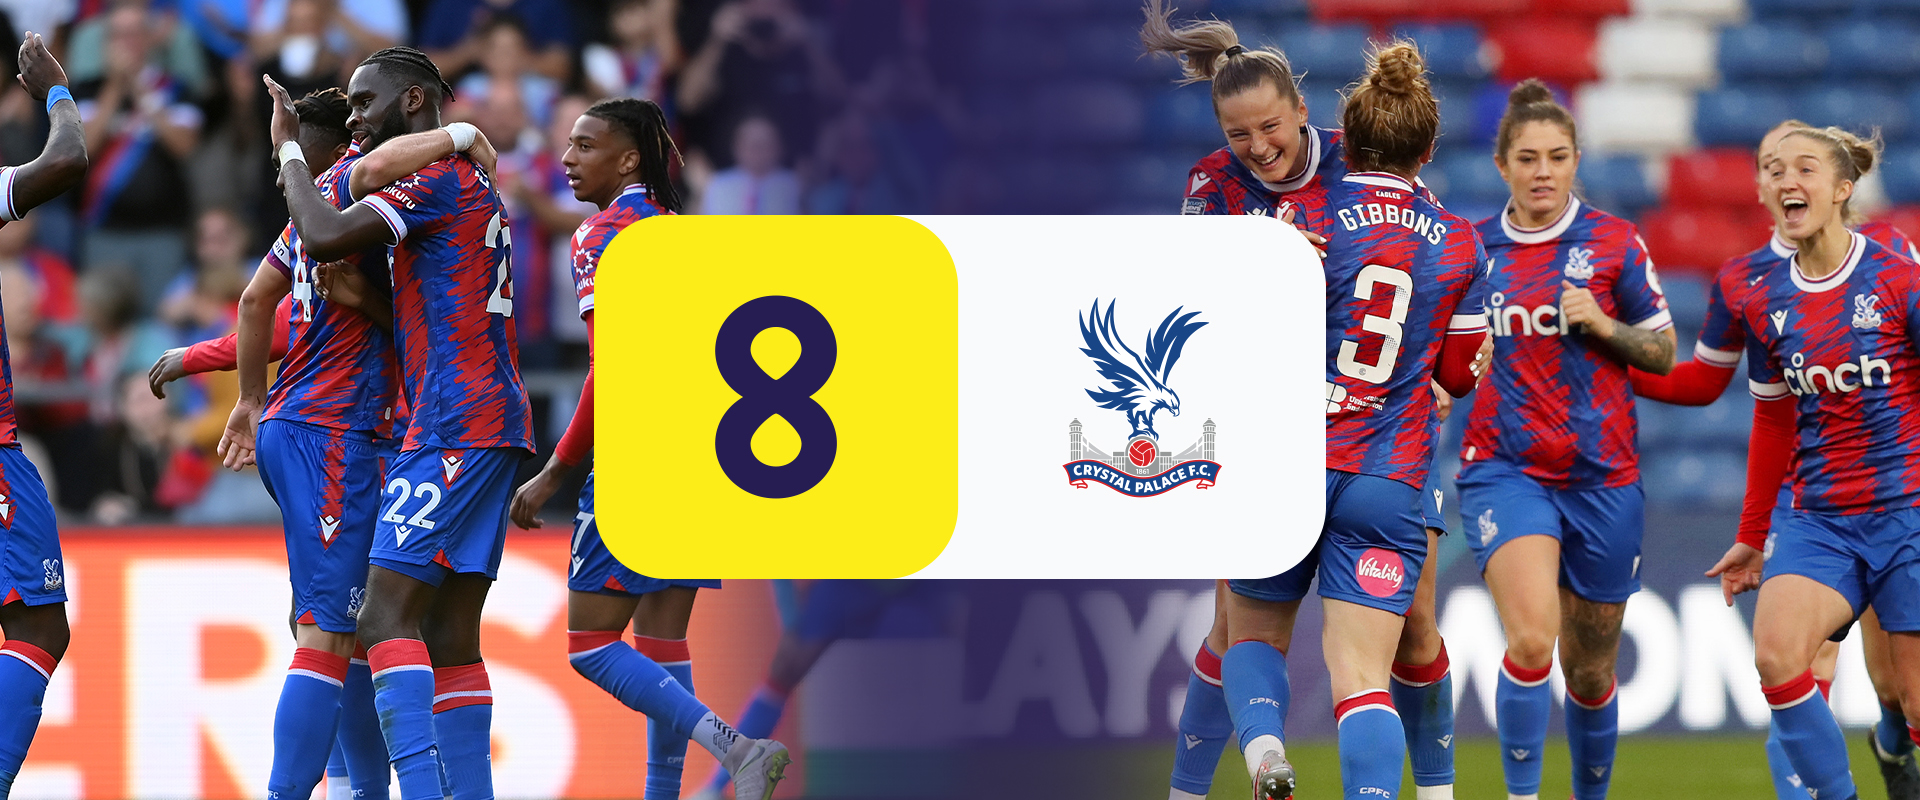 Crystal Palace F.C. has become the first football club to join WeAre8